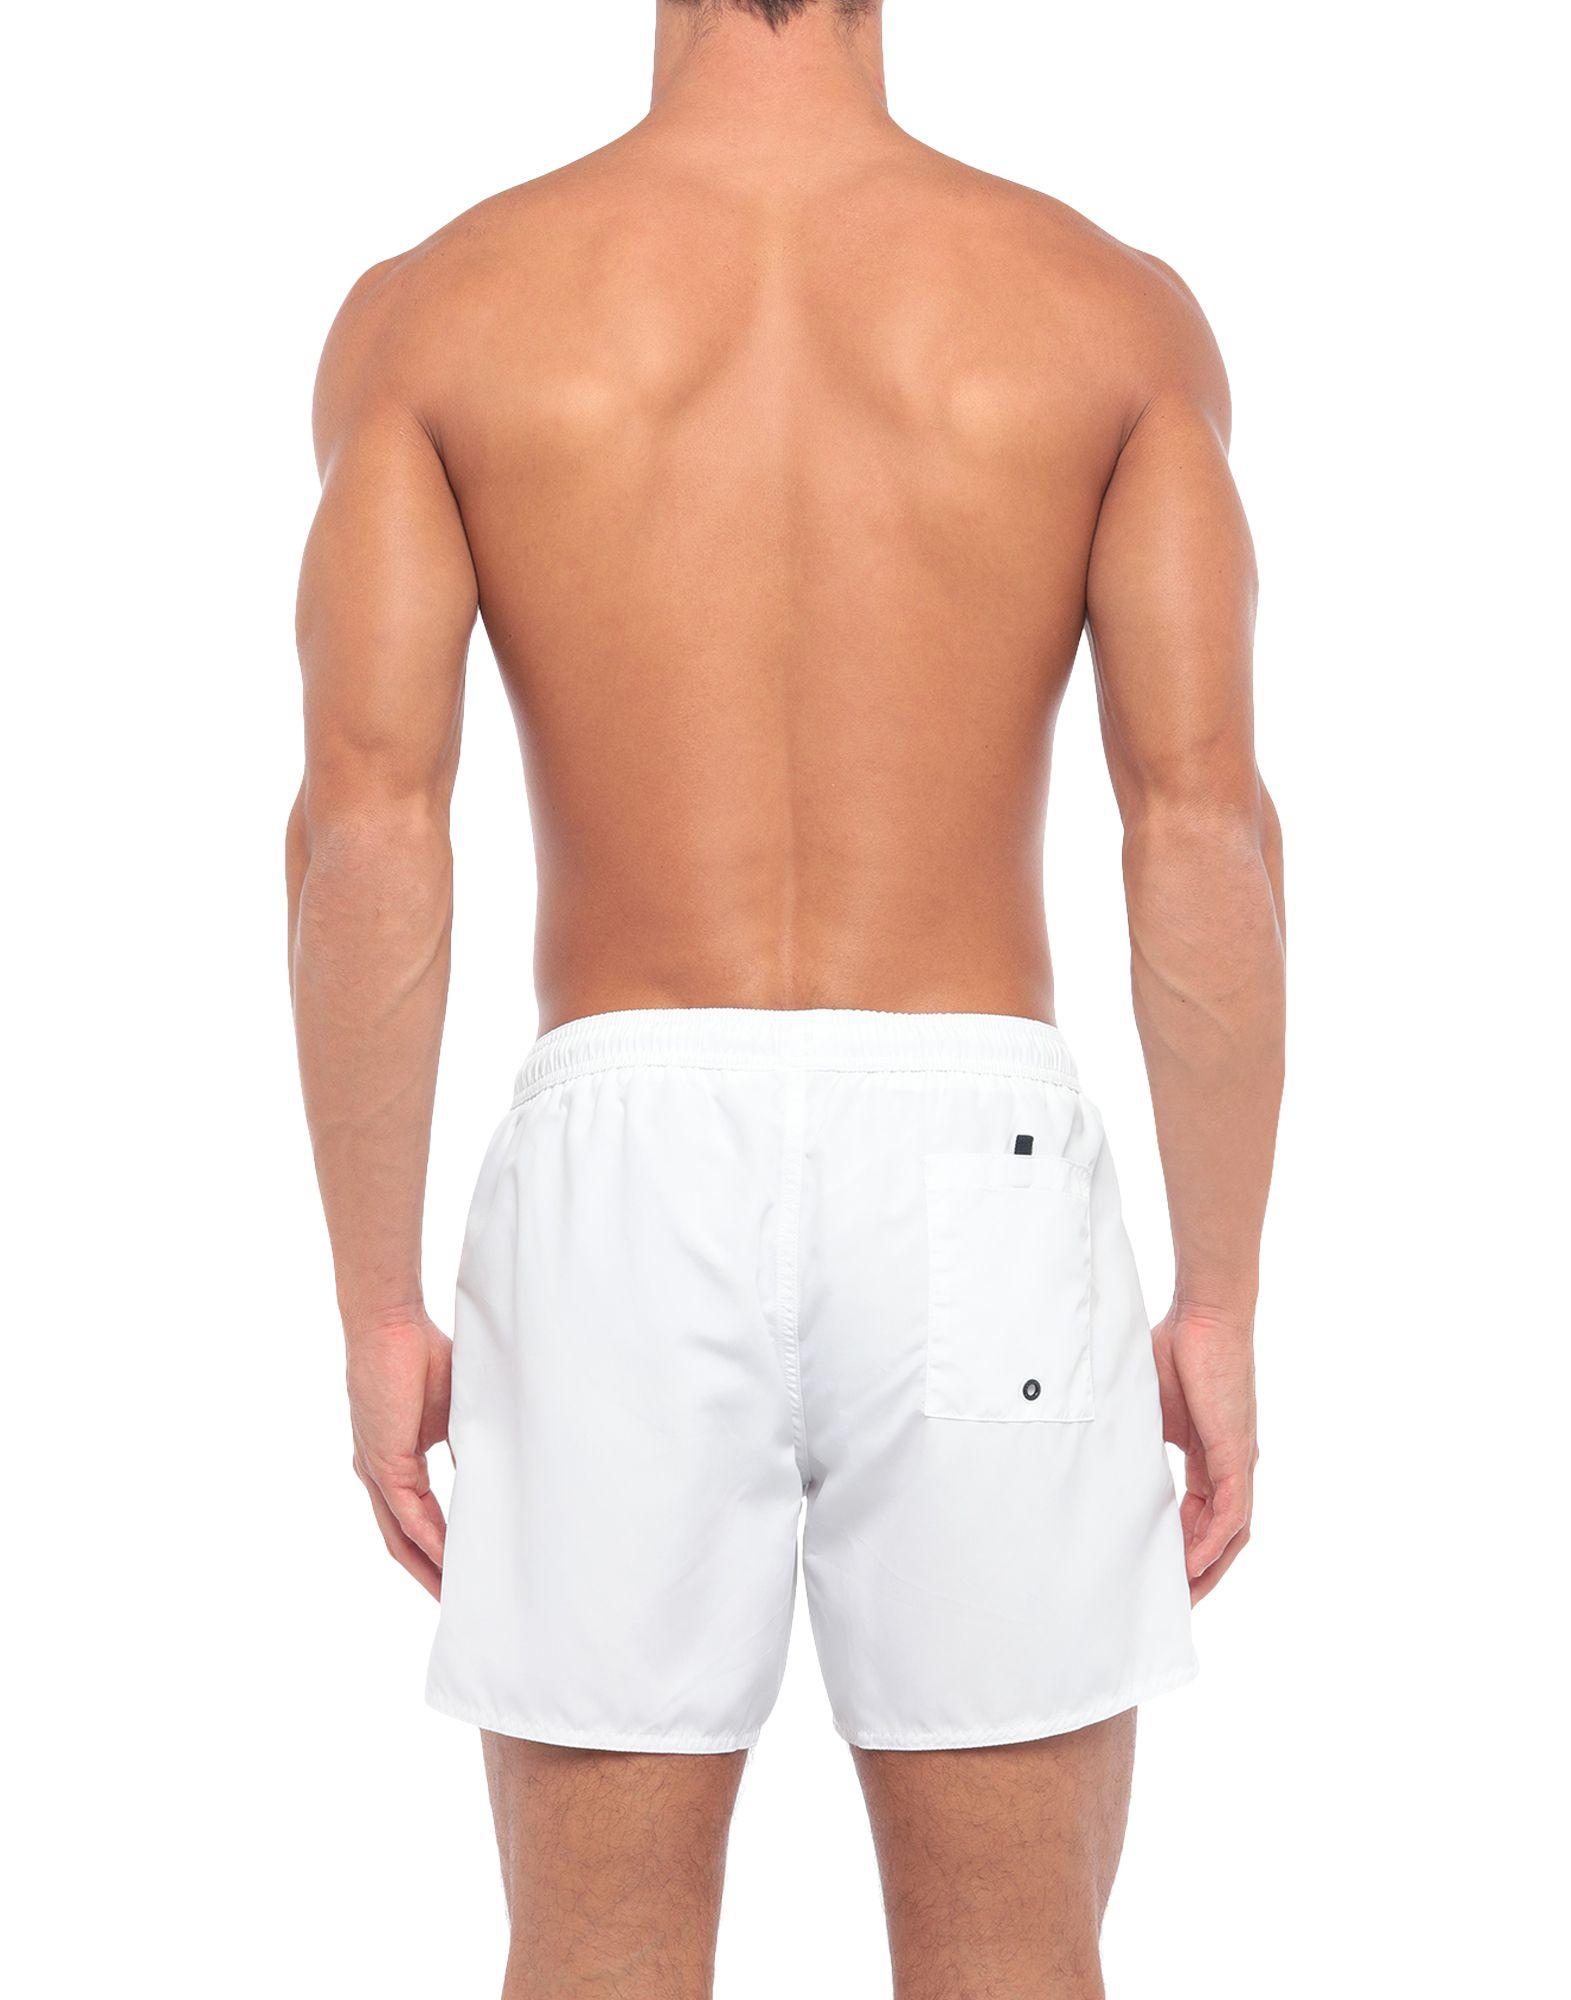 Armani Exchange Synthetic Swimming Trunks in White for Men - Lyst